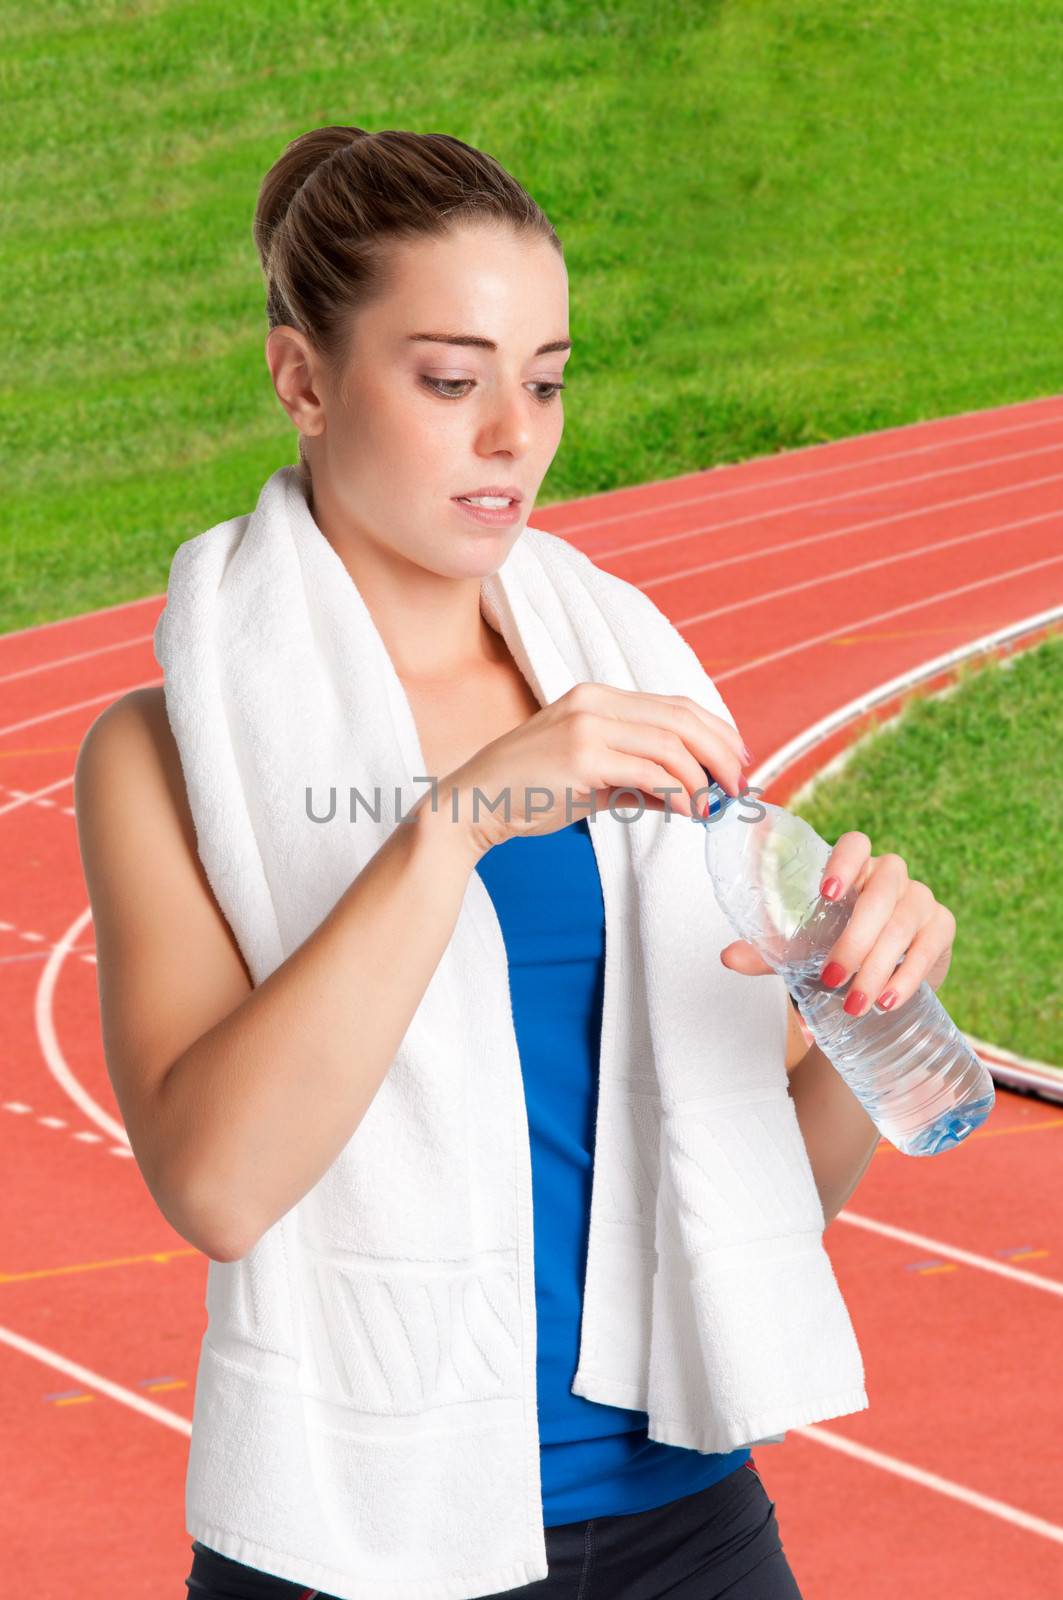 Woman about to drink water from a plastic bottle, with a running track behind her